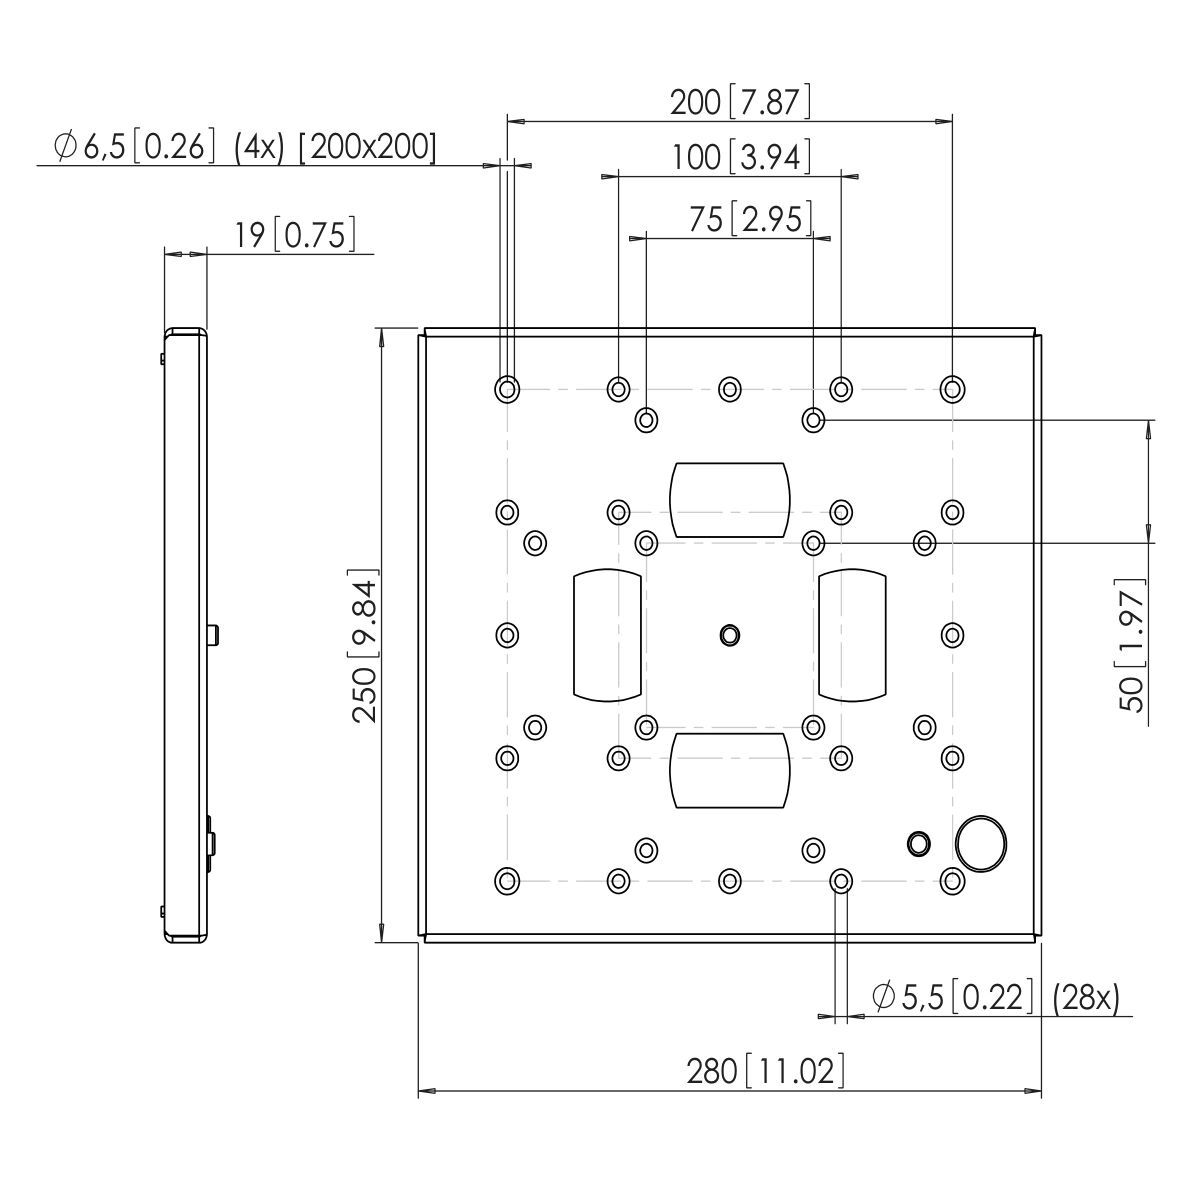 Vogel's FAU 3125 Display interface zilver - Dimensions